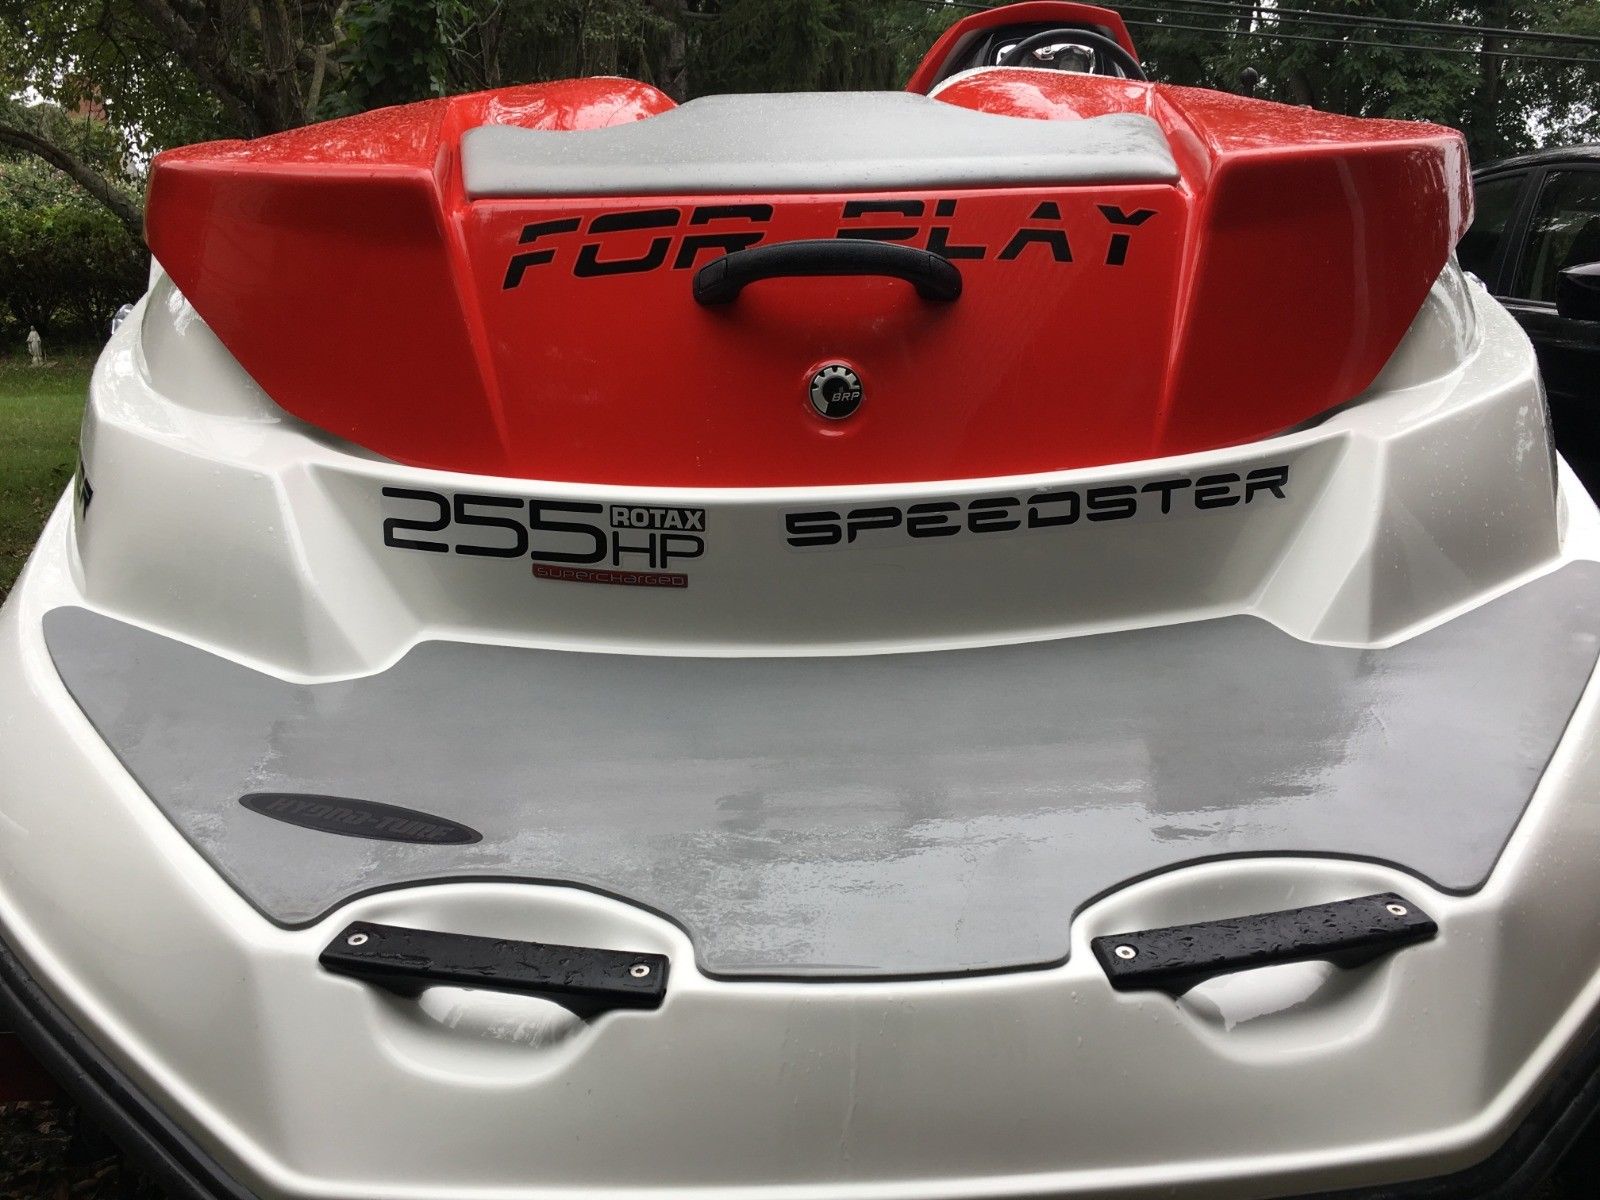 sea doo 2009 for sale for $10,999 - boats-from-usa.com